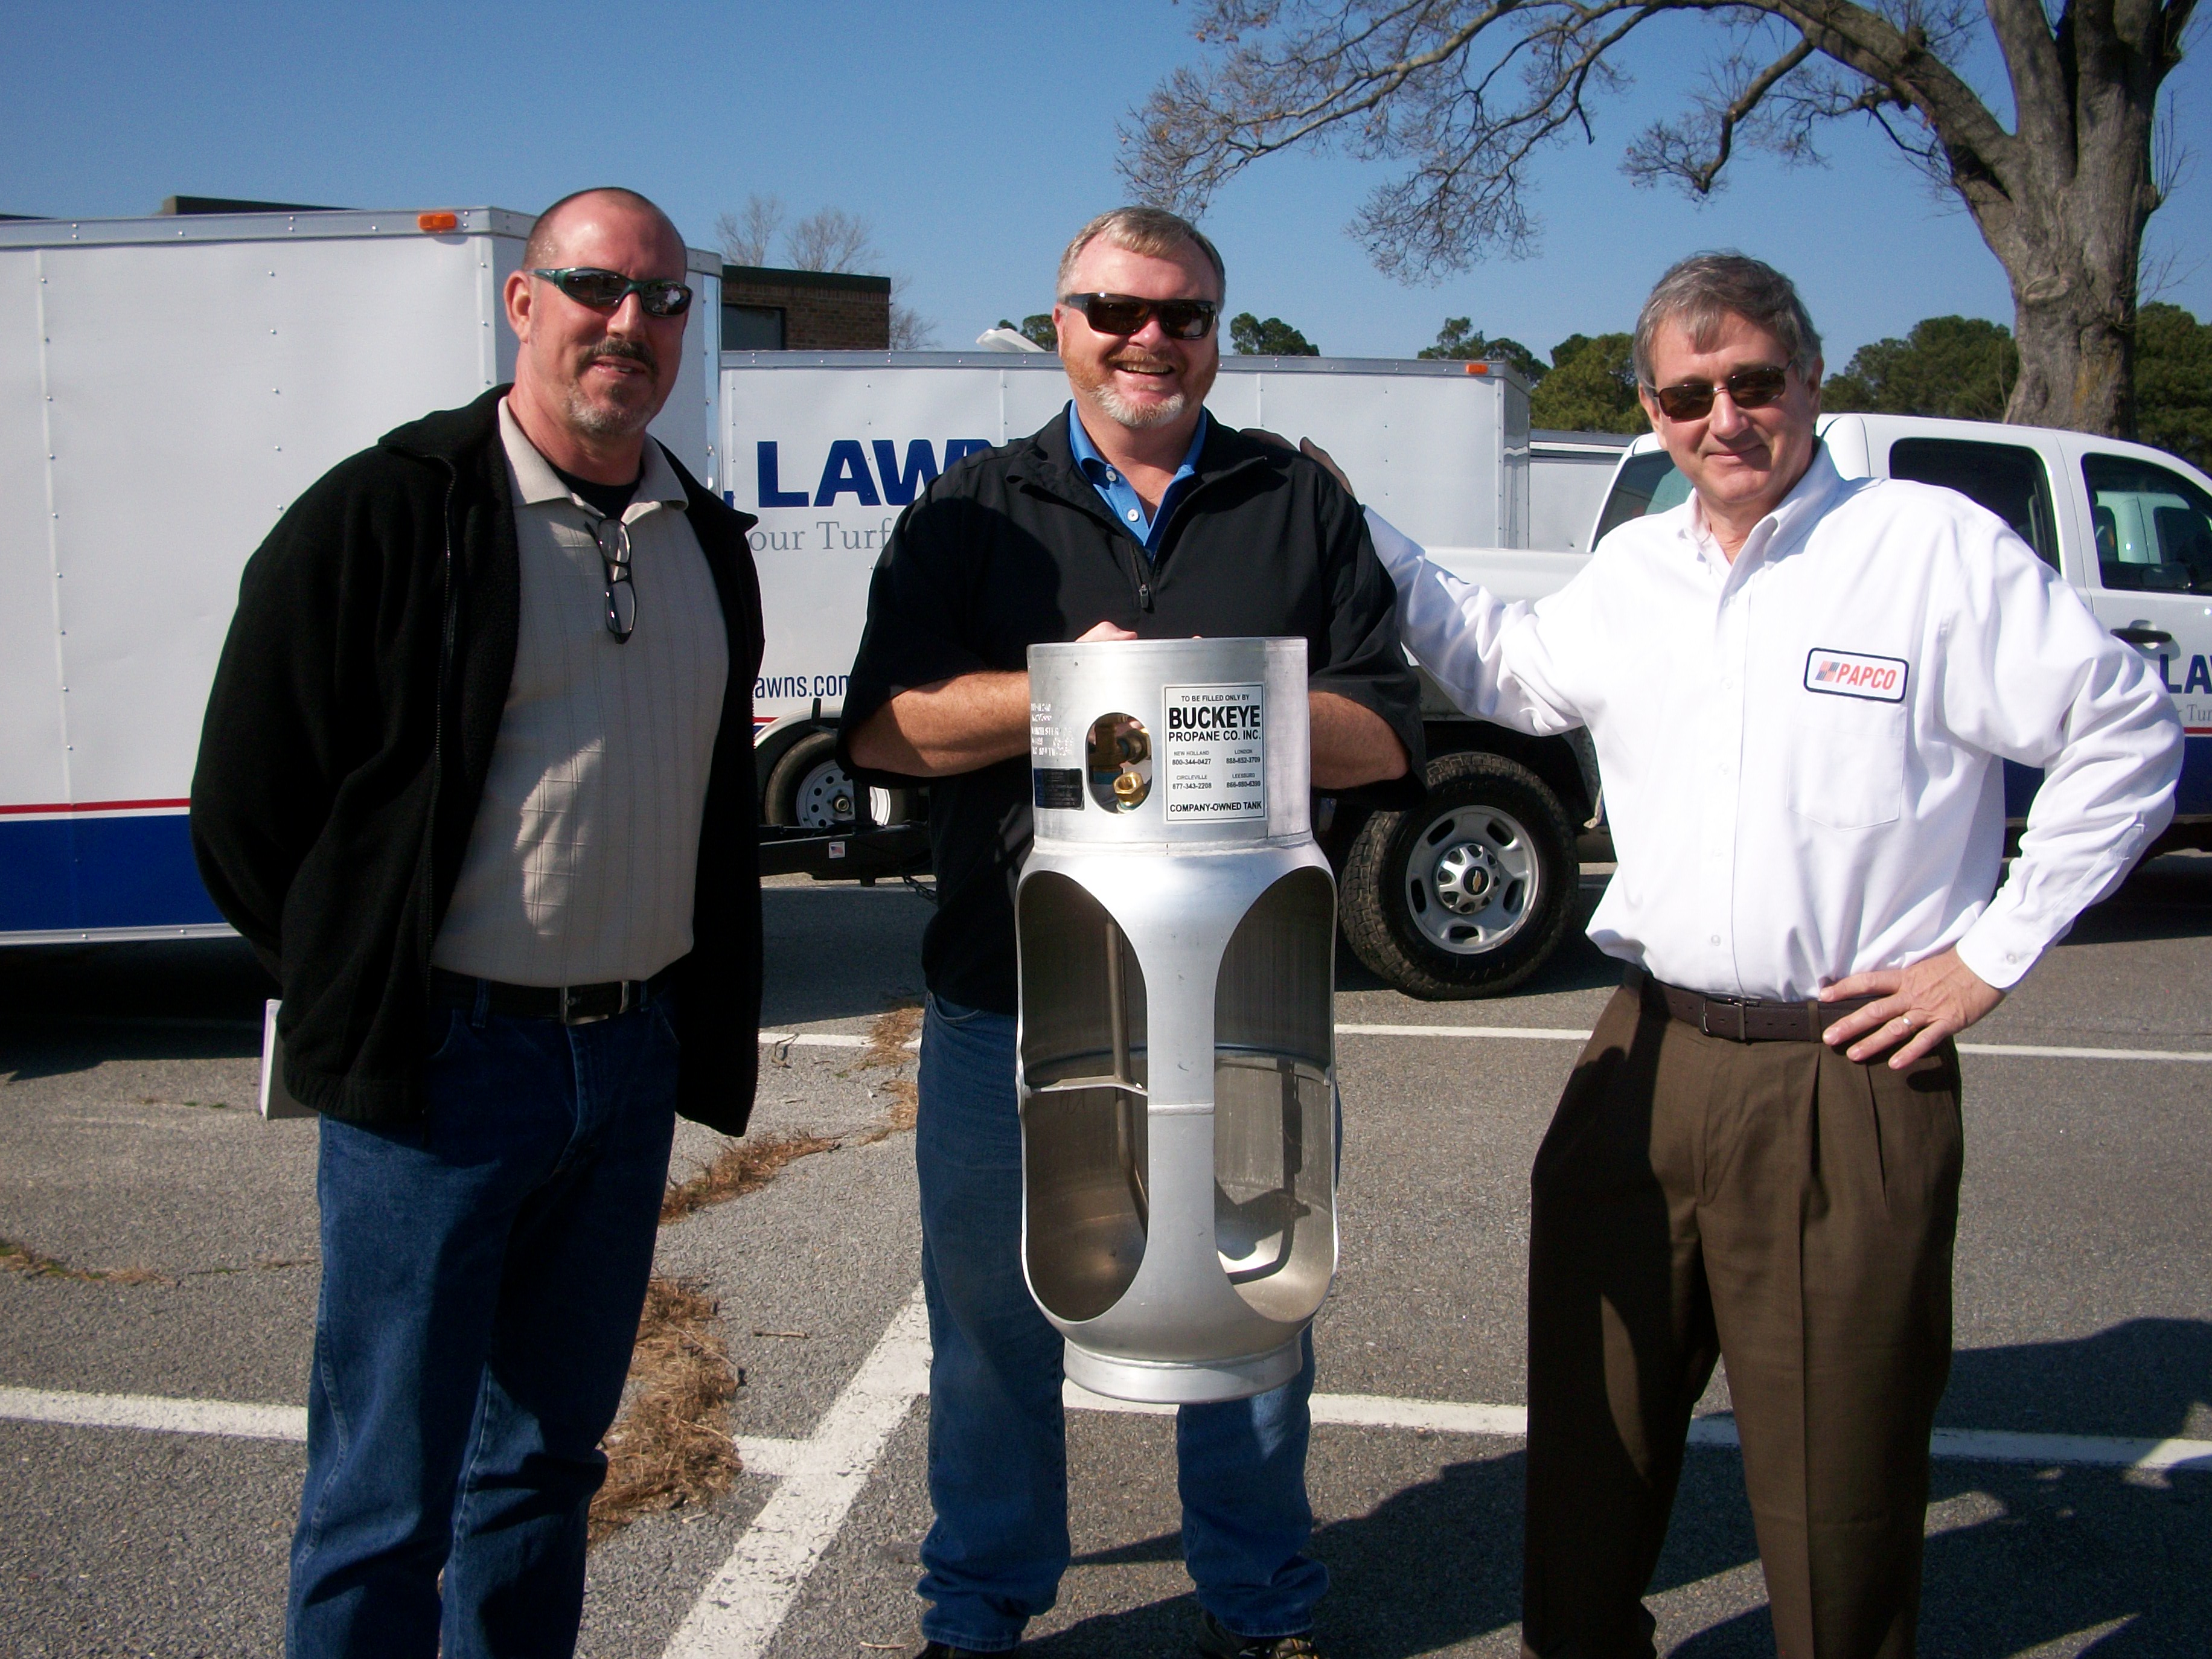 Richard Reddington PAPCO Sales Consultant, Steve Ferguson of US Lawns Hampton Roads, and Peter Ryan PAPCO General Manager conduct propane safety training